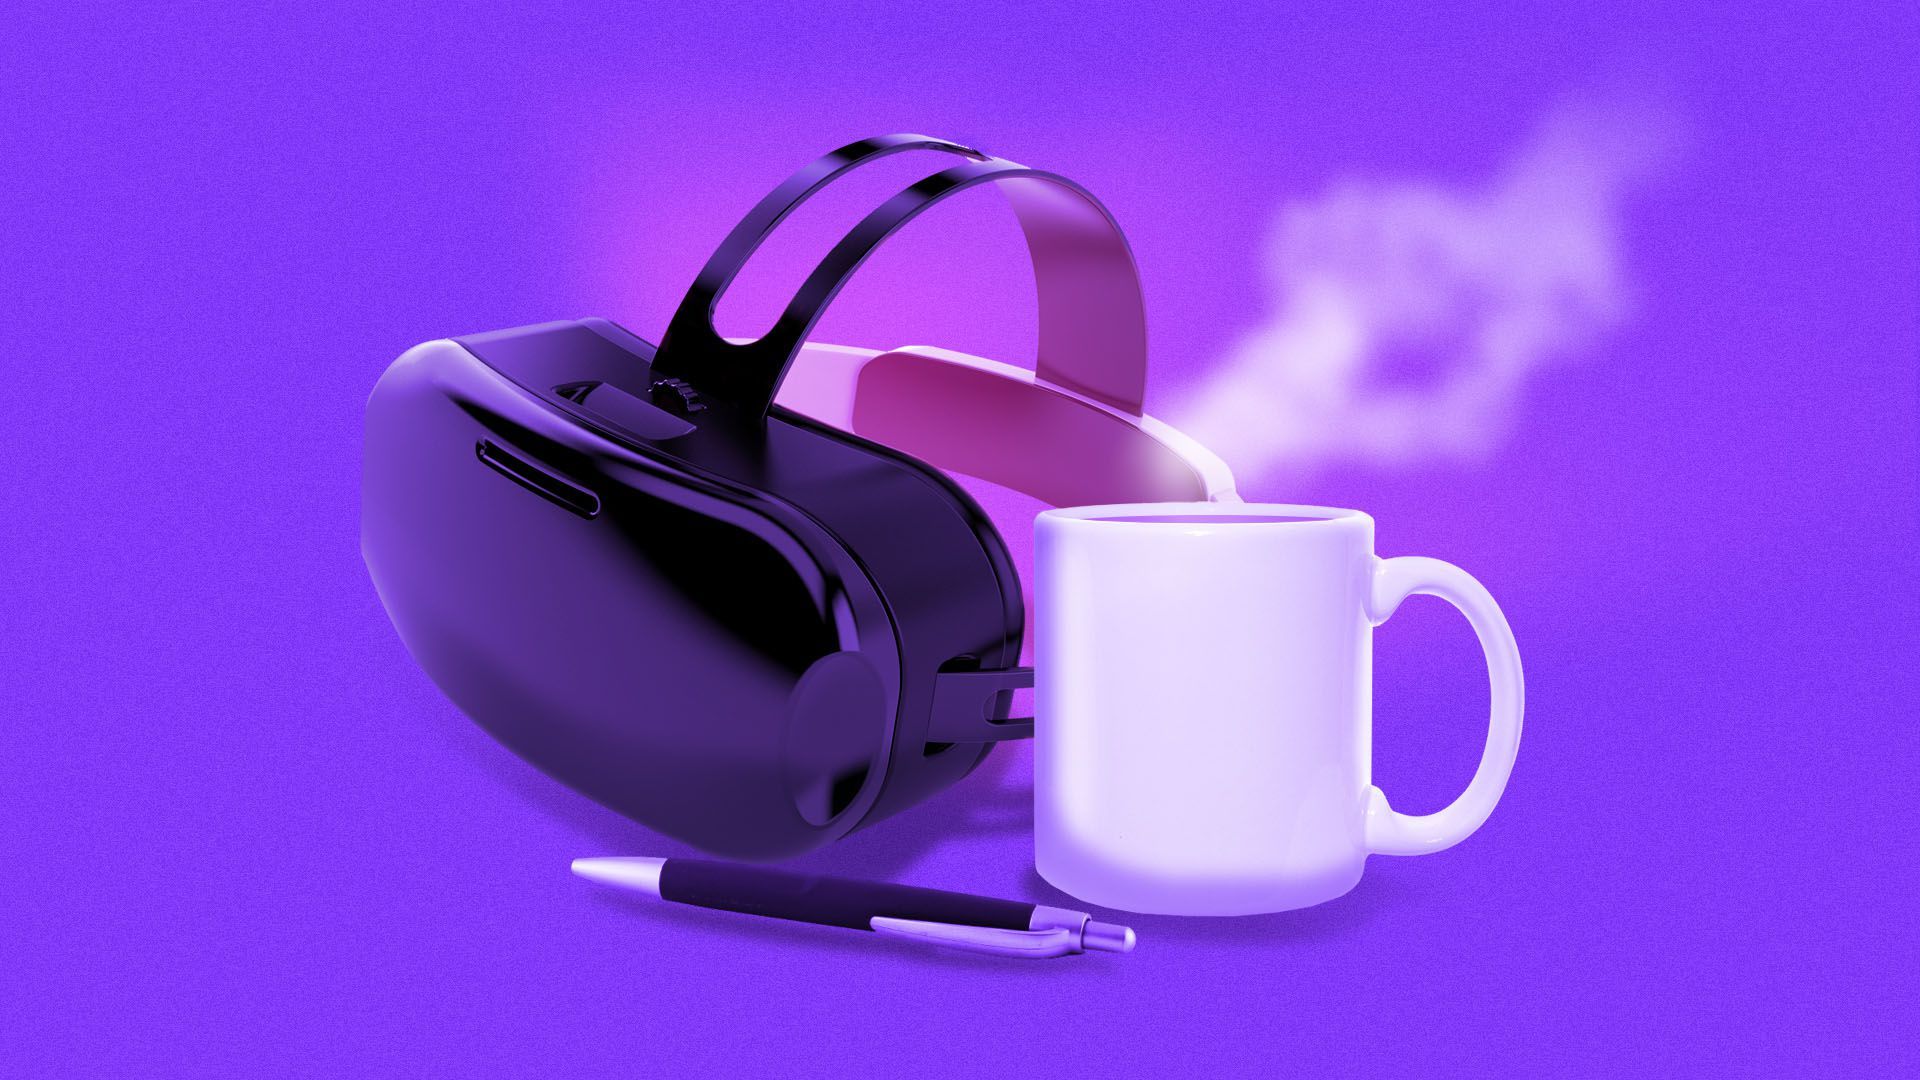 Illustration of a VR headset next to a steaming cup of coffee and a pen